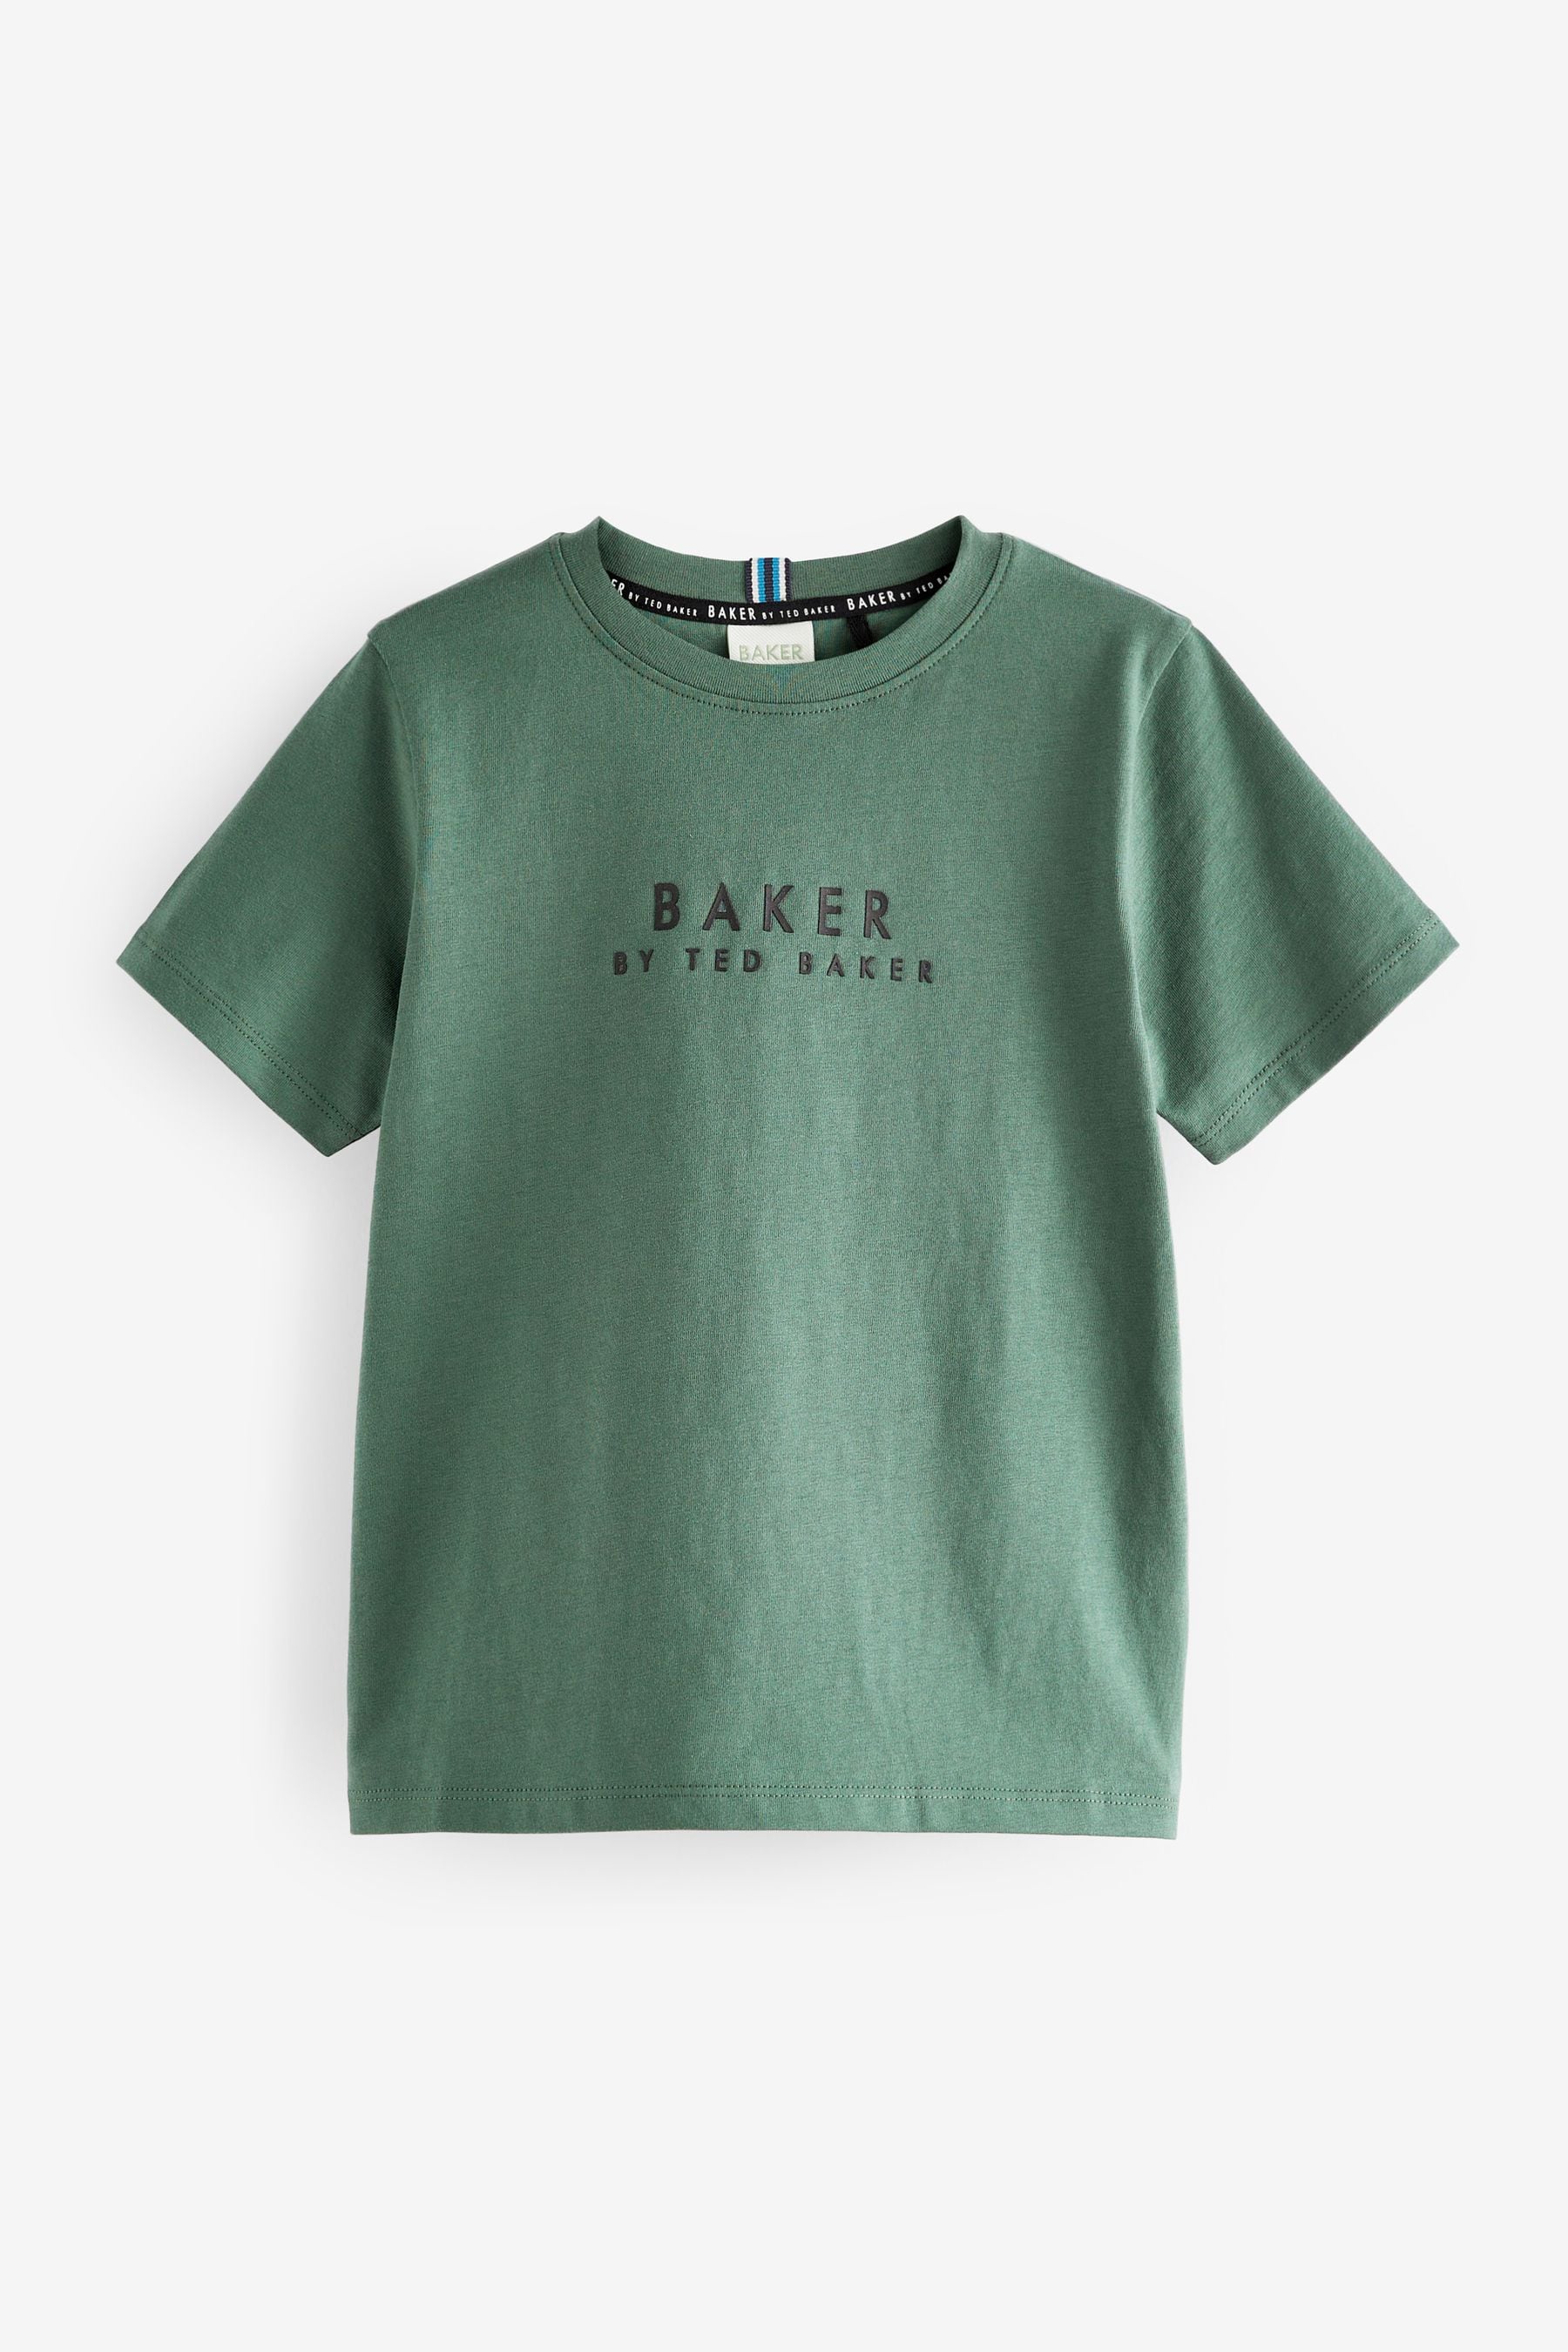 Buy Baker by Ted Baker T-Shirts 3 Packs from the Next UK online shop